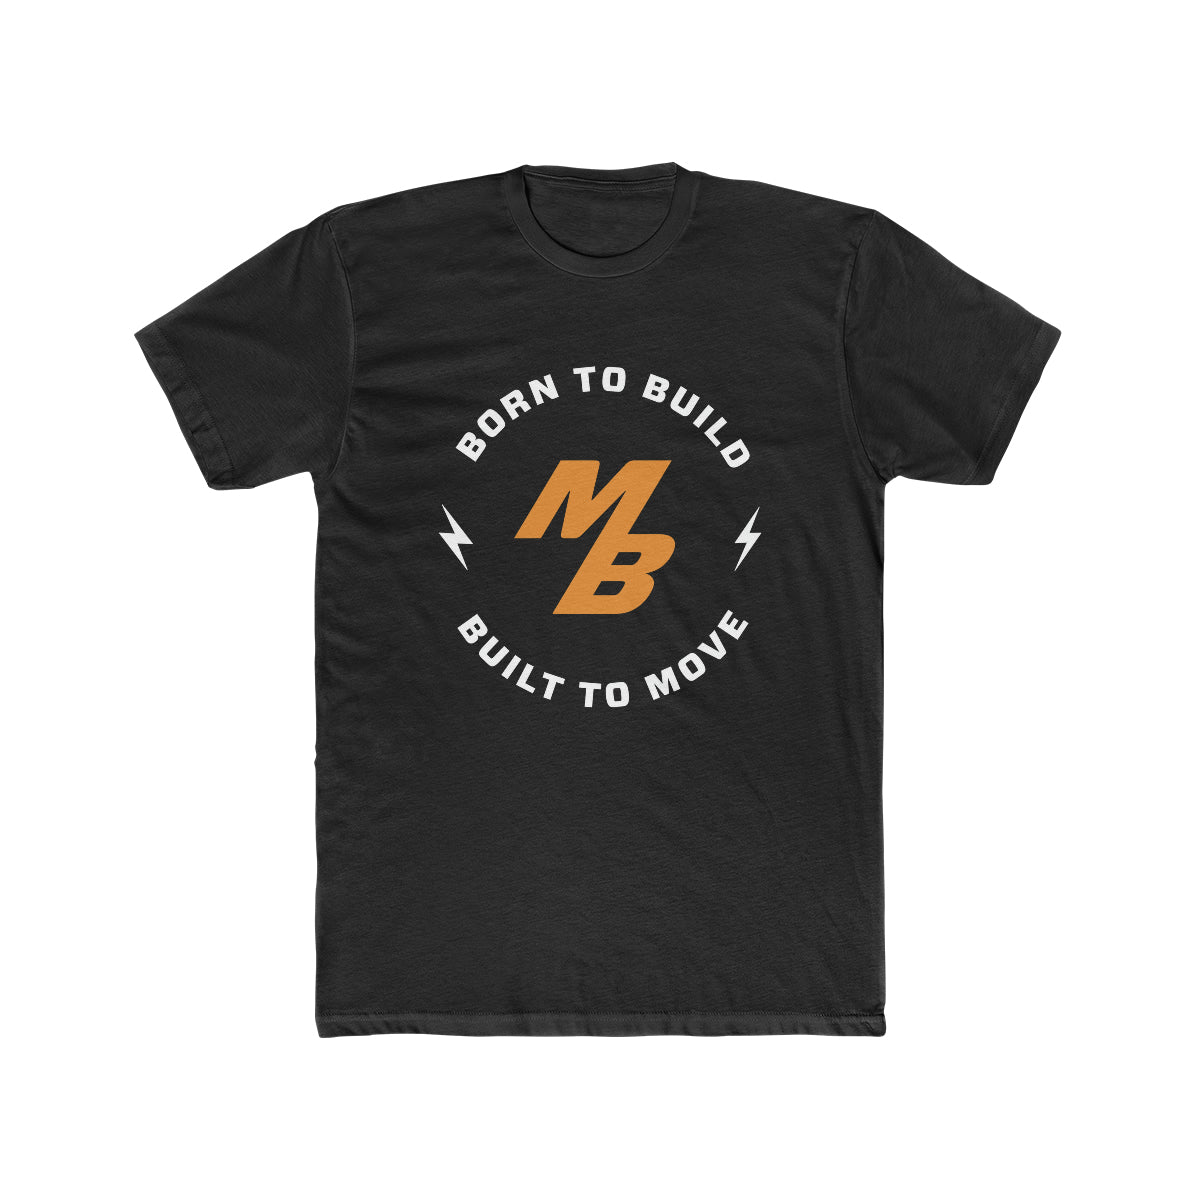 Born to Build Move Bumpers T-shirt- Black